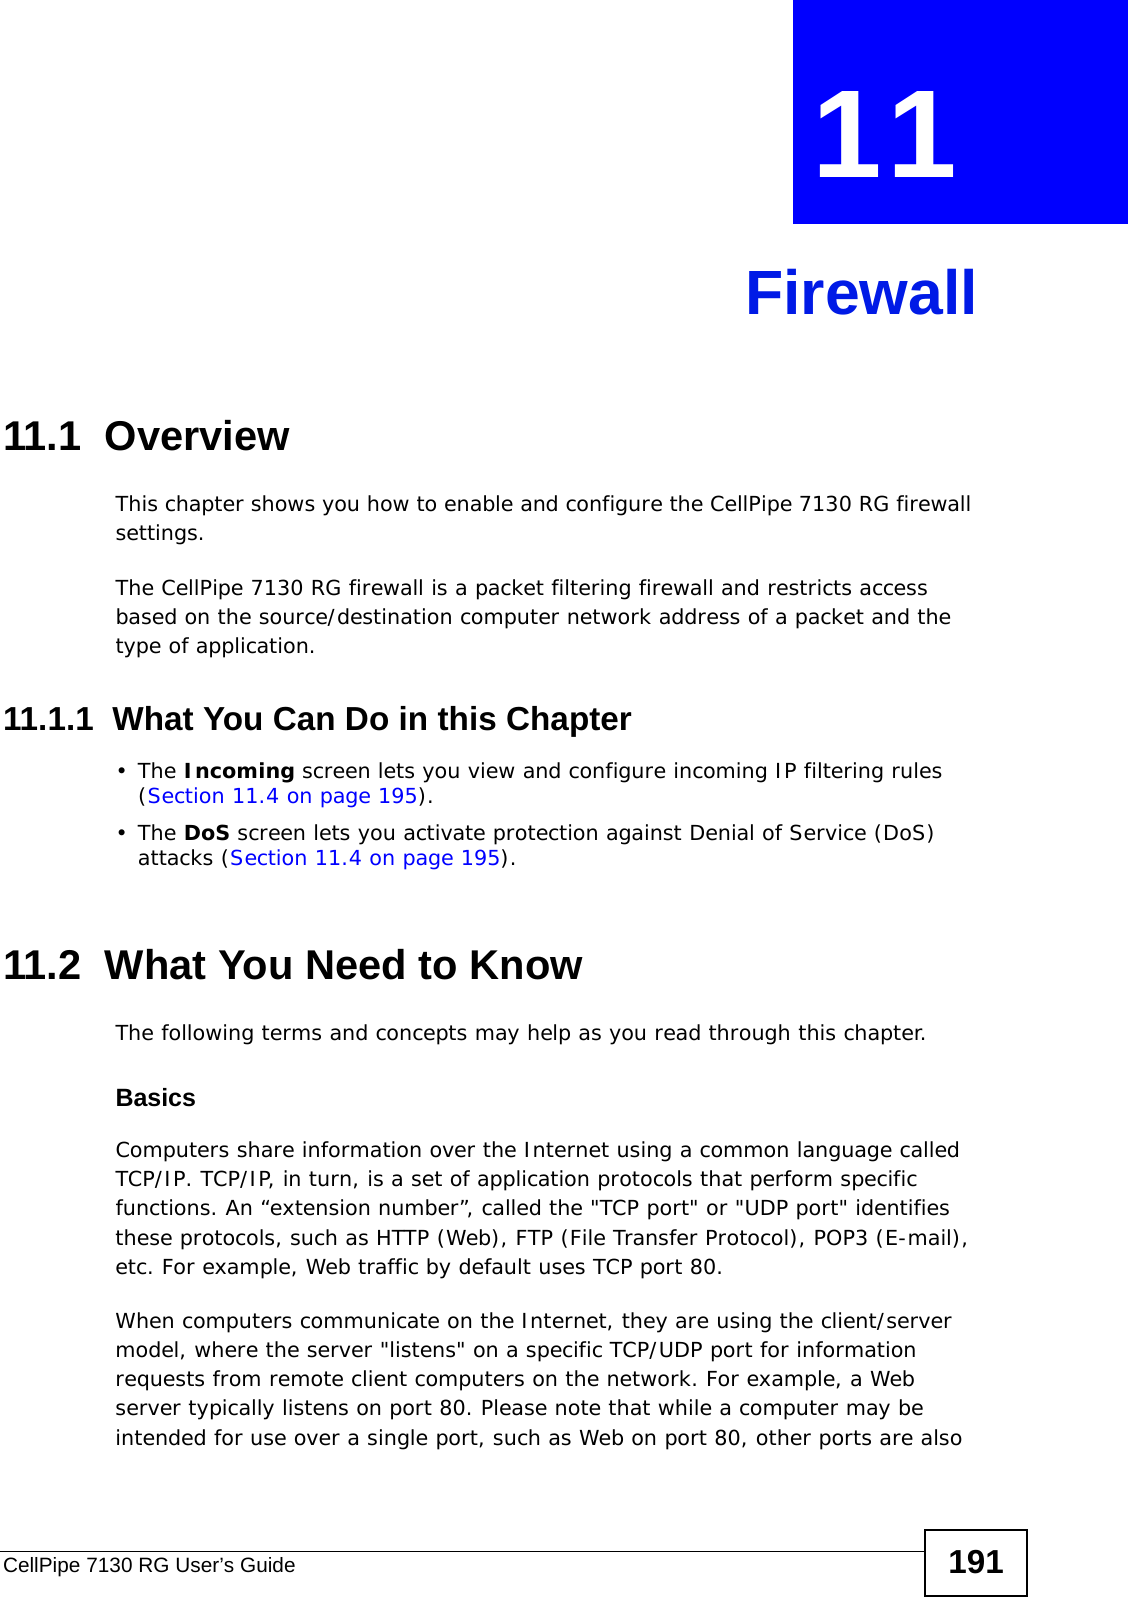 CellPipe 7130 RG User’s Guide 191CHAPTER  11 Firewall11.1  Overview This chapter shows you how to enable and configure the CellPipe 7130 RG firewall settings.The CellPipe 7130 RG firewall is a packet filtering firewall and restricts access based on the source/destination computer network address of a packet and the type of application. 11.1.1  What You Can Do in this Chapter•The Incoming screen lets you view and configure incoming IP filtering rules (Section 11.4 on page 195).•The DoS screen lets you activate protection against Denial of Service (DoS) attacks (Section 11.4 on page 195).11.2  What You Need to KnowThe following terms and concepts may help as you read through this chapter.BasicsComputers share information over the Internet using a common language called TCP/IP. TCP/IP, in turn, is a set of application protocols that perform specific functions. An “extension number”, called the &quot;TCP port&quot; or &quot;UDP port&quot; identifies these protocols, such as HTTP (Web), FTP (File Transfer Protocol), POP3 (E-mail), etc. For example, Web traffic by default uses TCP port 80. When computers communicate on the Internet, they are using the client/server model, where the server &quot;listens&quot; on a specific TCP/UDP port for information requests from remote client computers on the network. For example, a Web server typically listens on port 80. Please note that while a computer may be intended for use over a single port, such as Web on port 80, other ports are also 